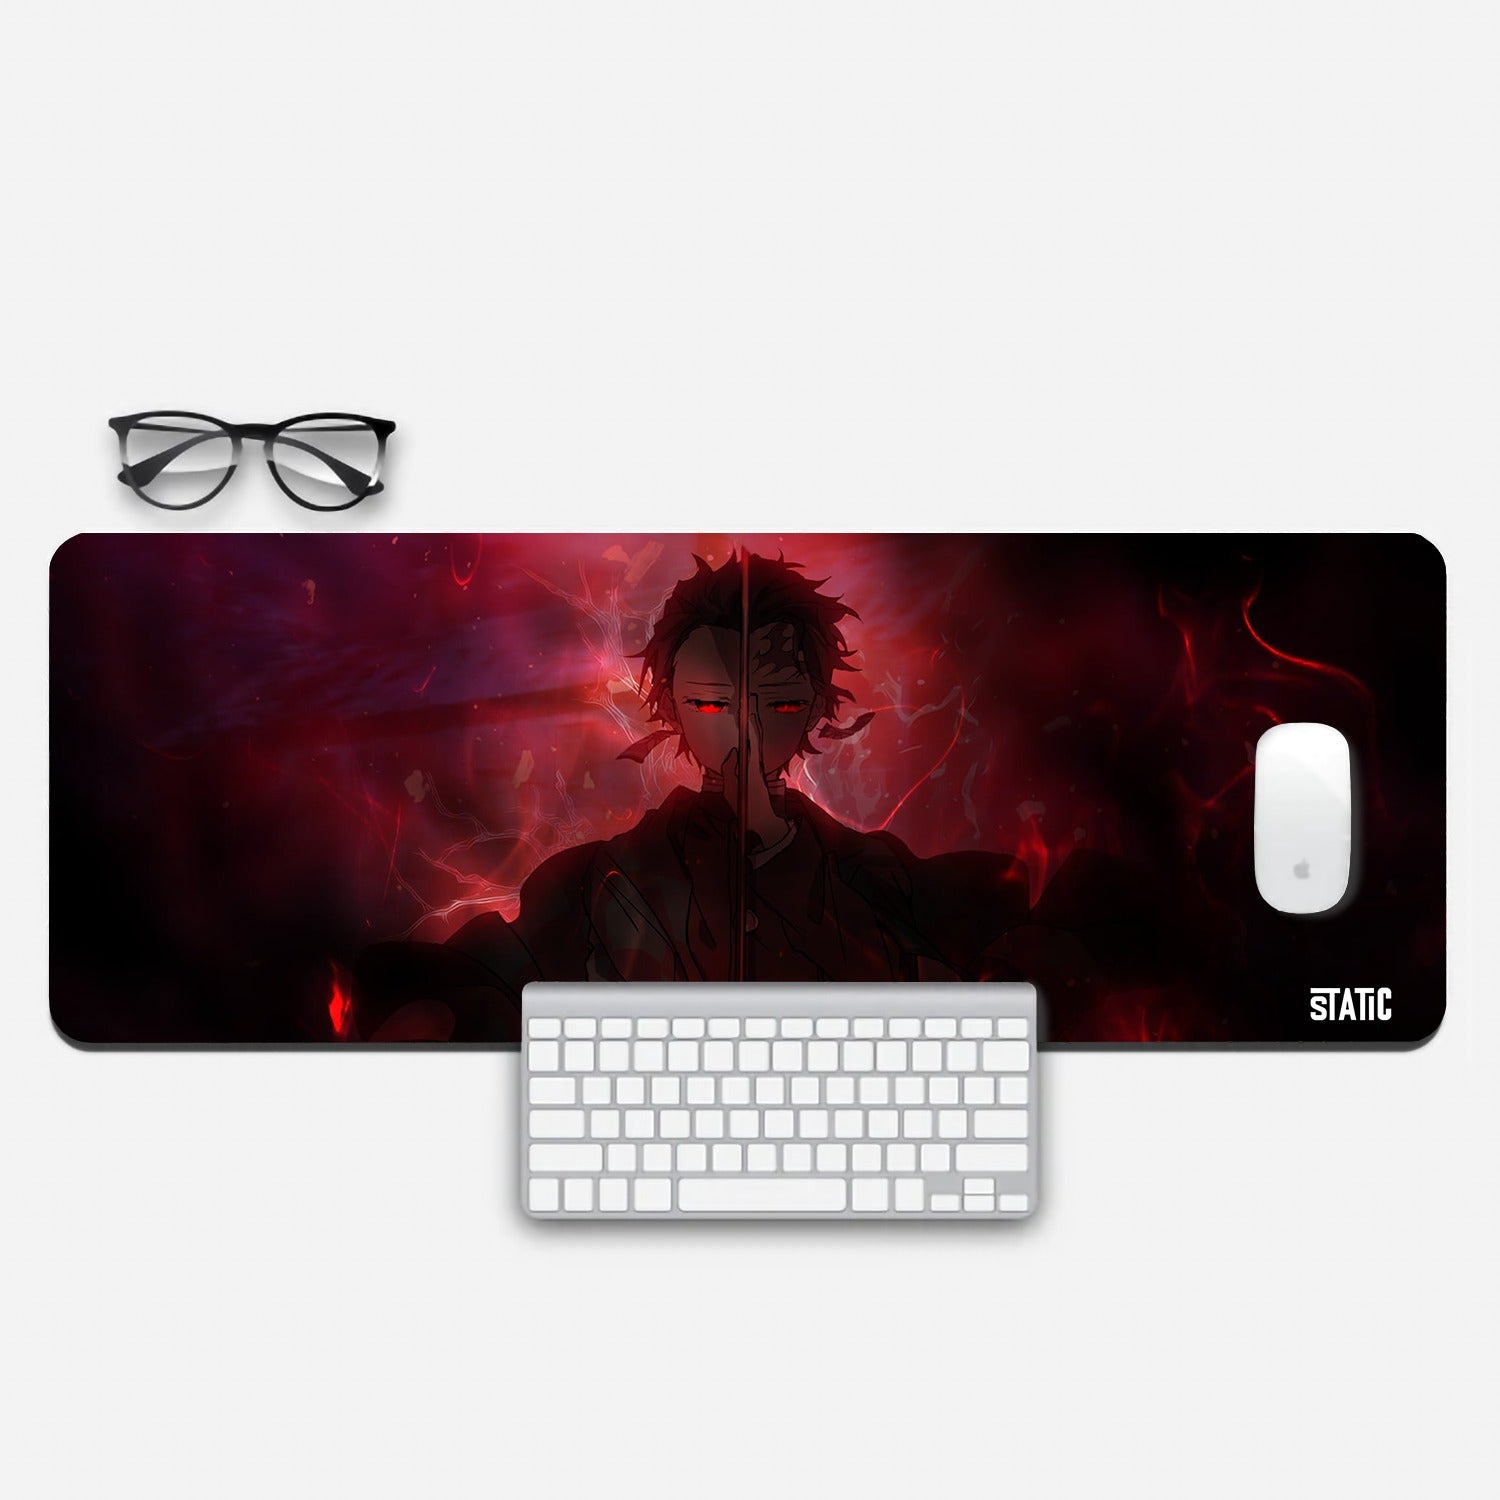 Experience the electrifying world of Demon Slayer with our extended gaming mouse pad. Featuring Tanjiro Kamado in full battle mode, his sword raised and eyes ablaze with red intensity. Red sparks and lightning backdrop amplify the thrill. Enhance your gaming precision and immerse yourself in the world of Demon Slayer. Order now to wield Tanjiro's power in your gaming battles.